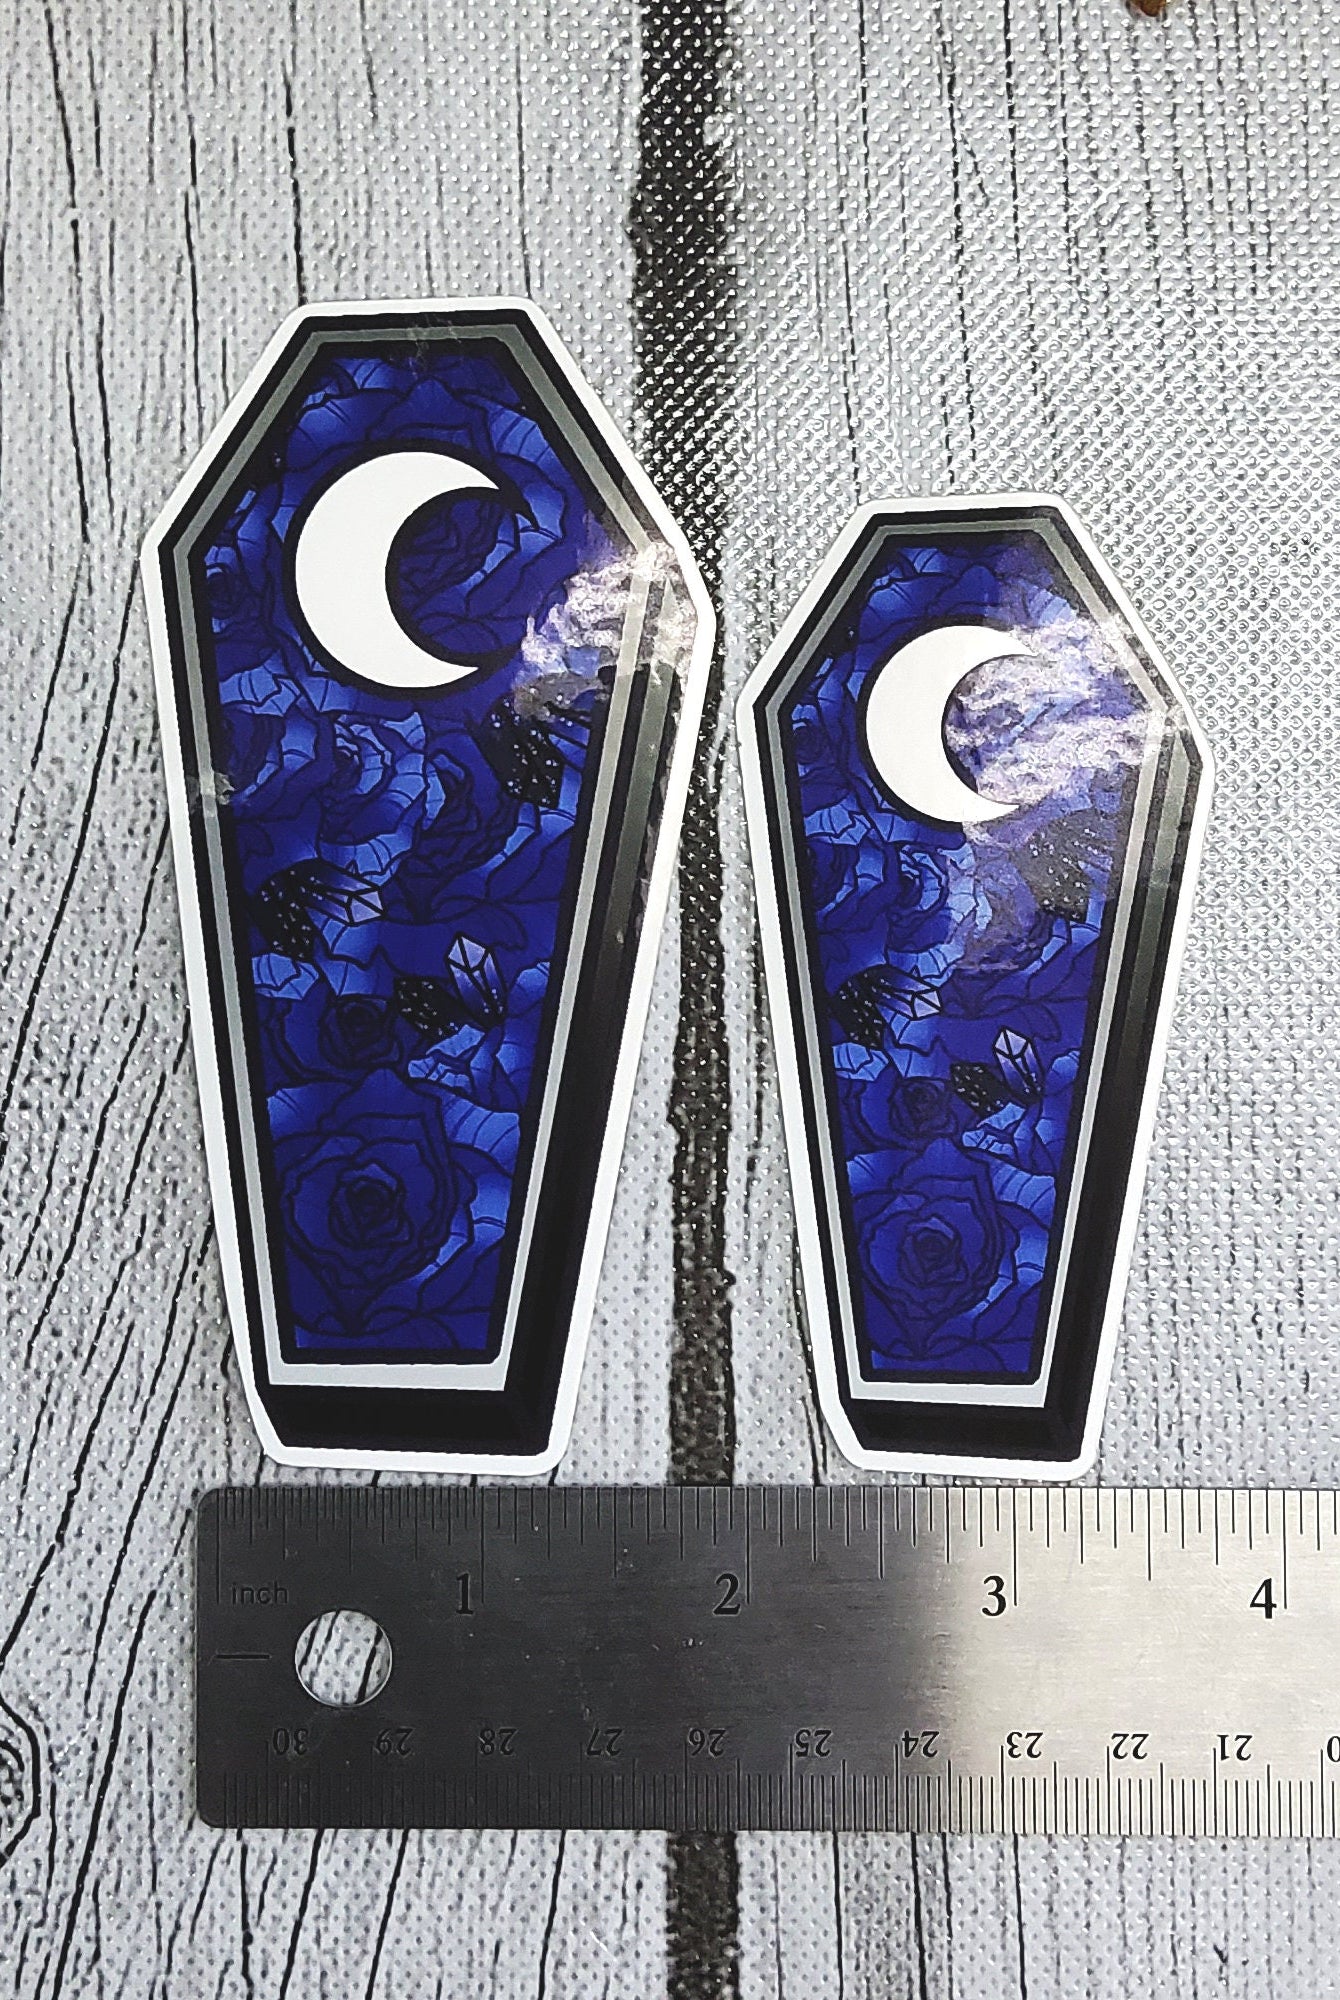 GLOSSY STICKER: Blue Roses Coffin with Moon Die Cut Sticker , Blue Roses Coffin Sticker , Blue Roses and Moon Sticker , Coffin Floral